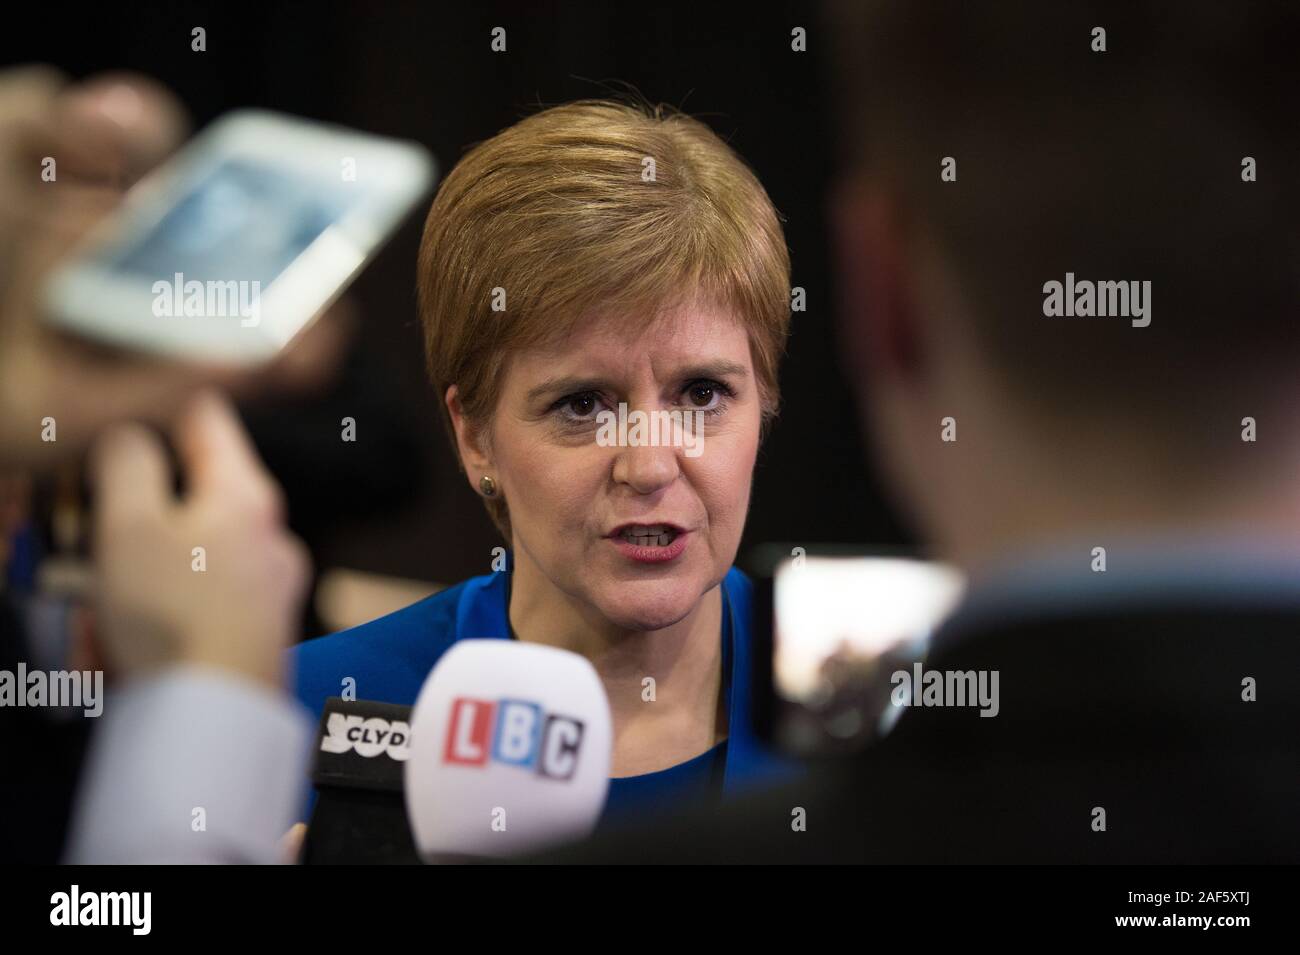 Glasgow, UK. 13th Dec, 2019. Pictured: (in blue) Nicola Sturgeon MSP - First Minister of Scotland and Leader of the Scottish National Party (SNP). Scenes from the vote count at the Scottish Exhibition and Conference Centre (SECC). The poles have now closed at 10pm and the vote count is now underway for the UK Parliamentary General Election 2019. This is the first time in almost 100 years that a general election has taken place in December. Credit: Colin Fisher/Alamy Live News Stock Photo